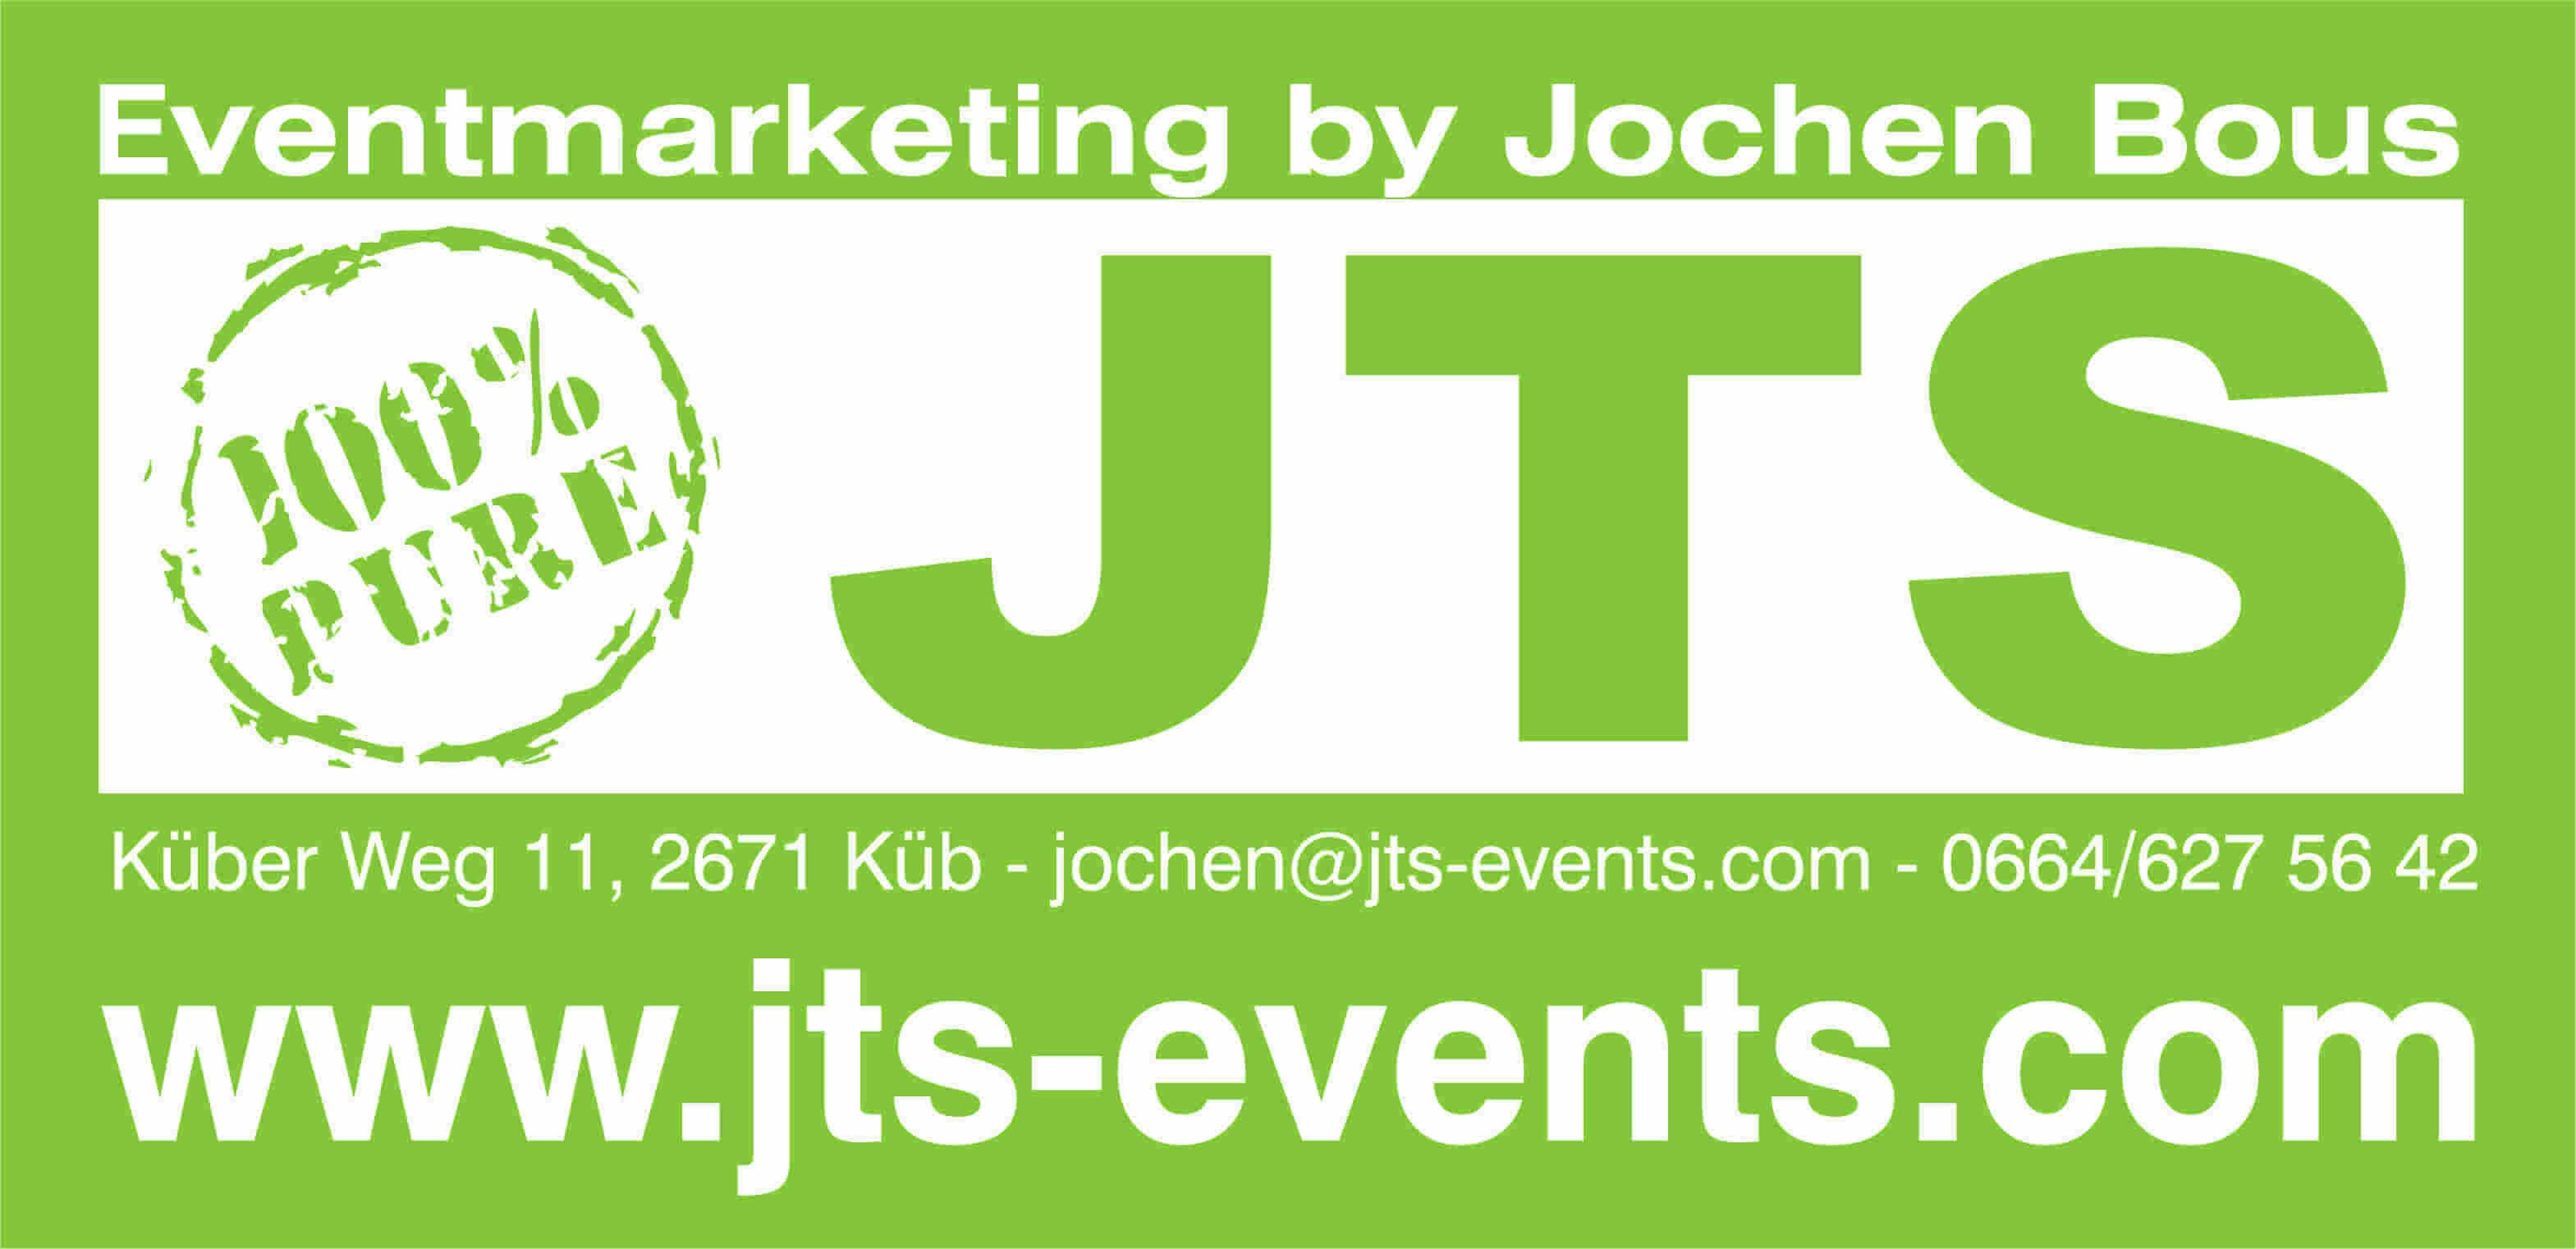 JTS-Events